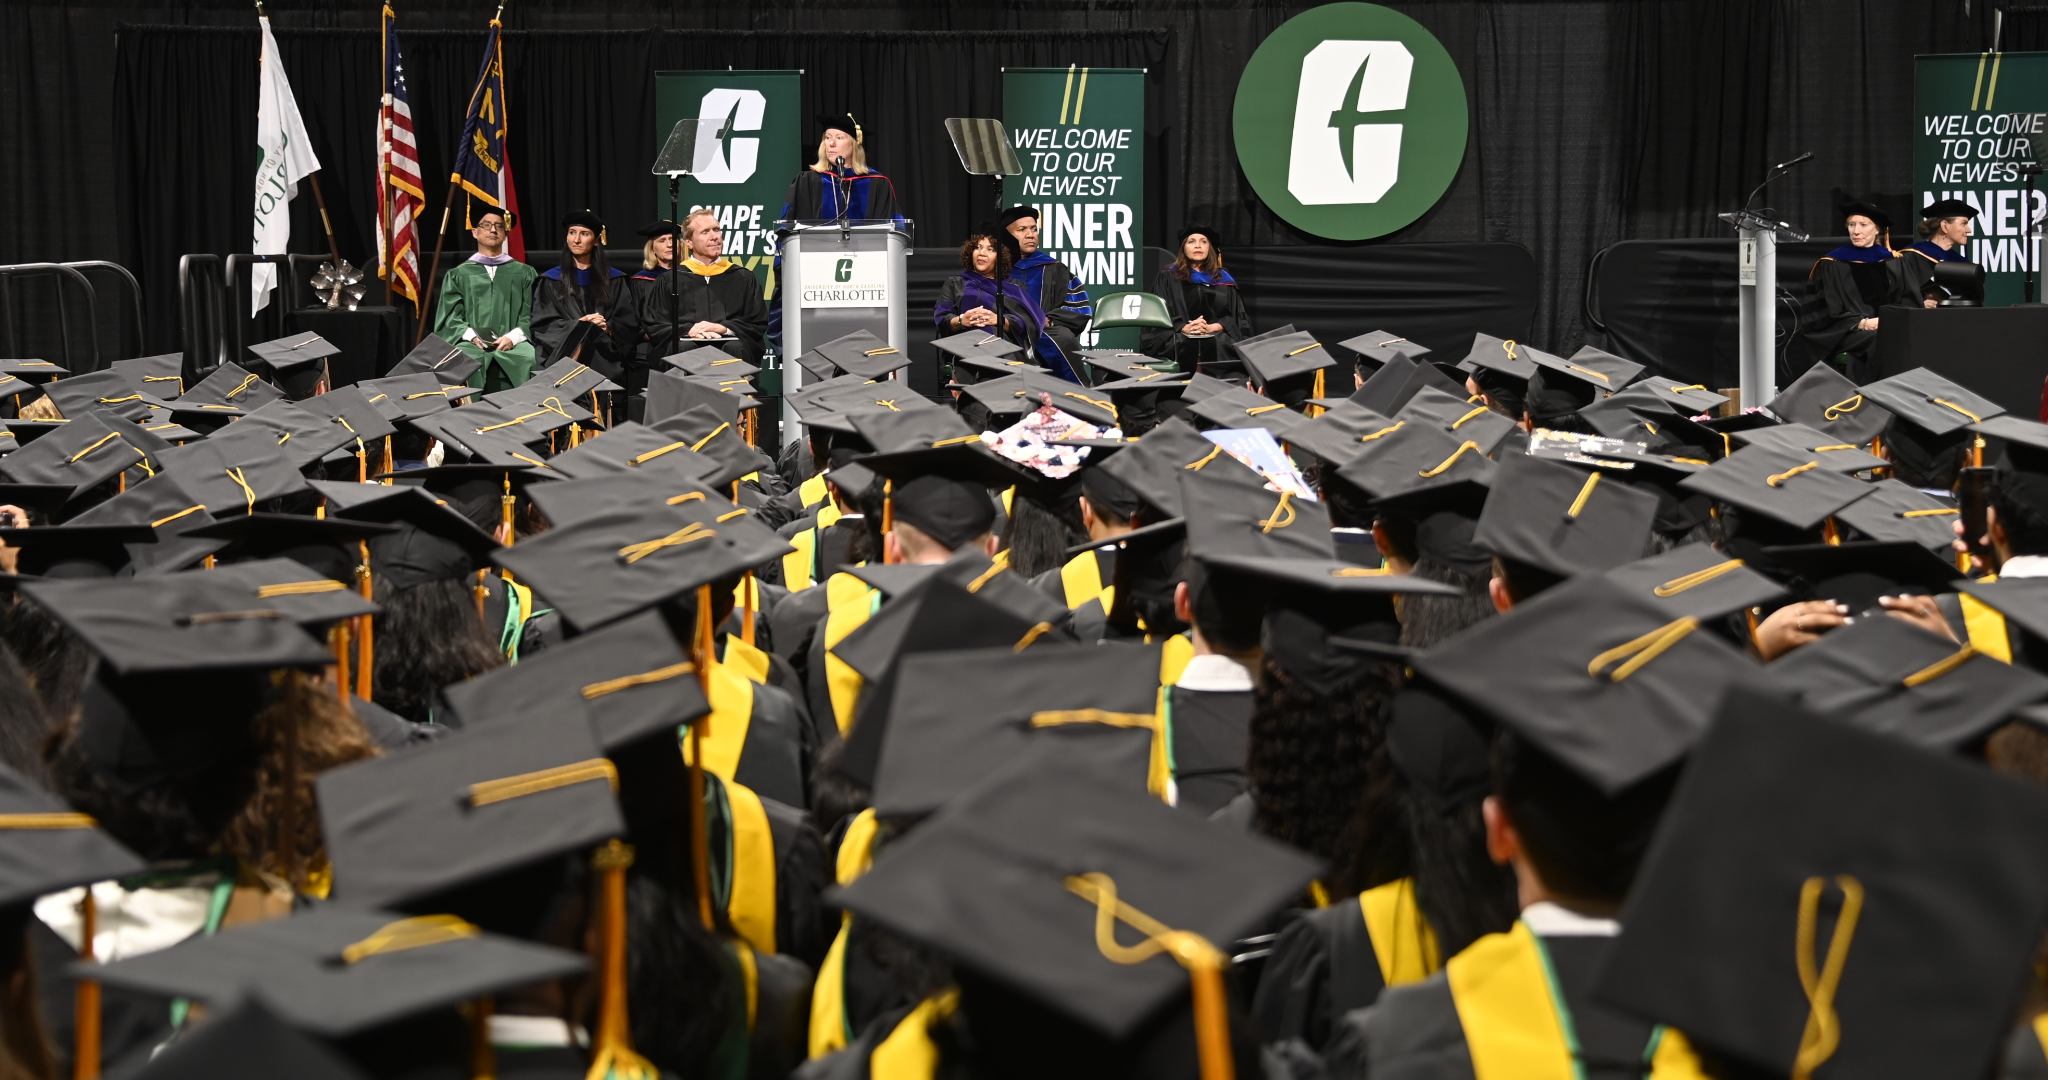 Graduate students at commencement listen to Chancellor Gaber's remarks